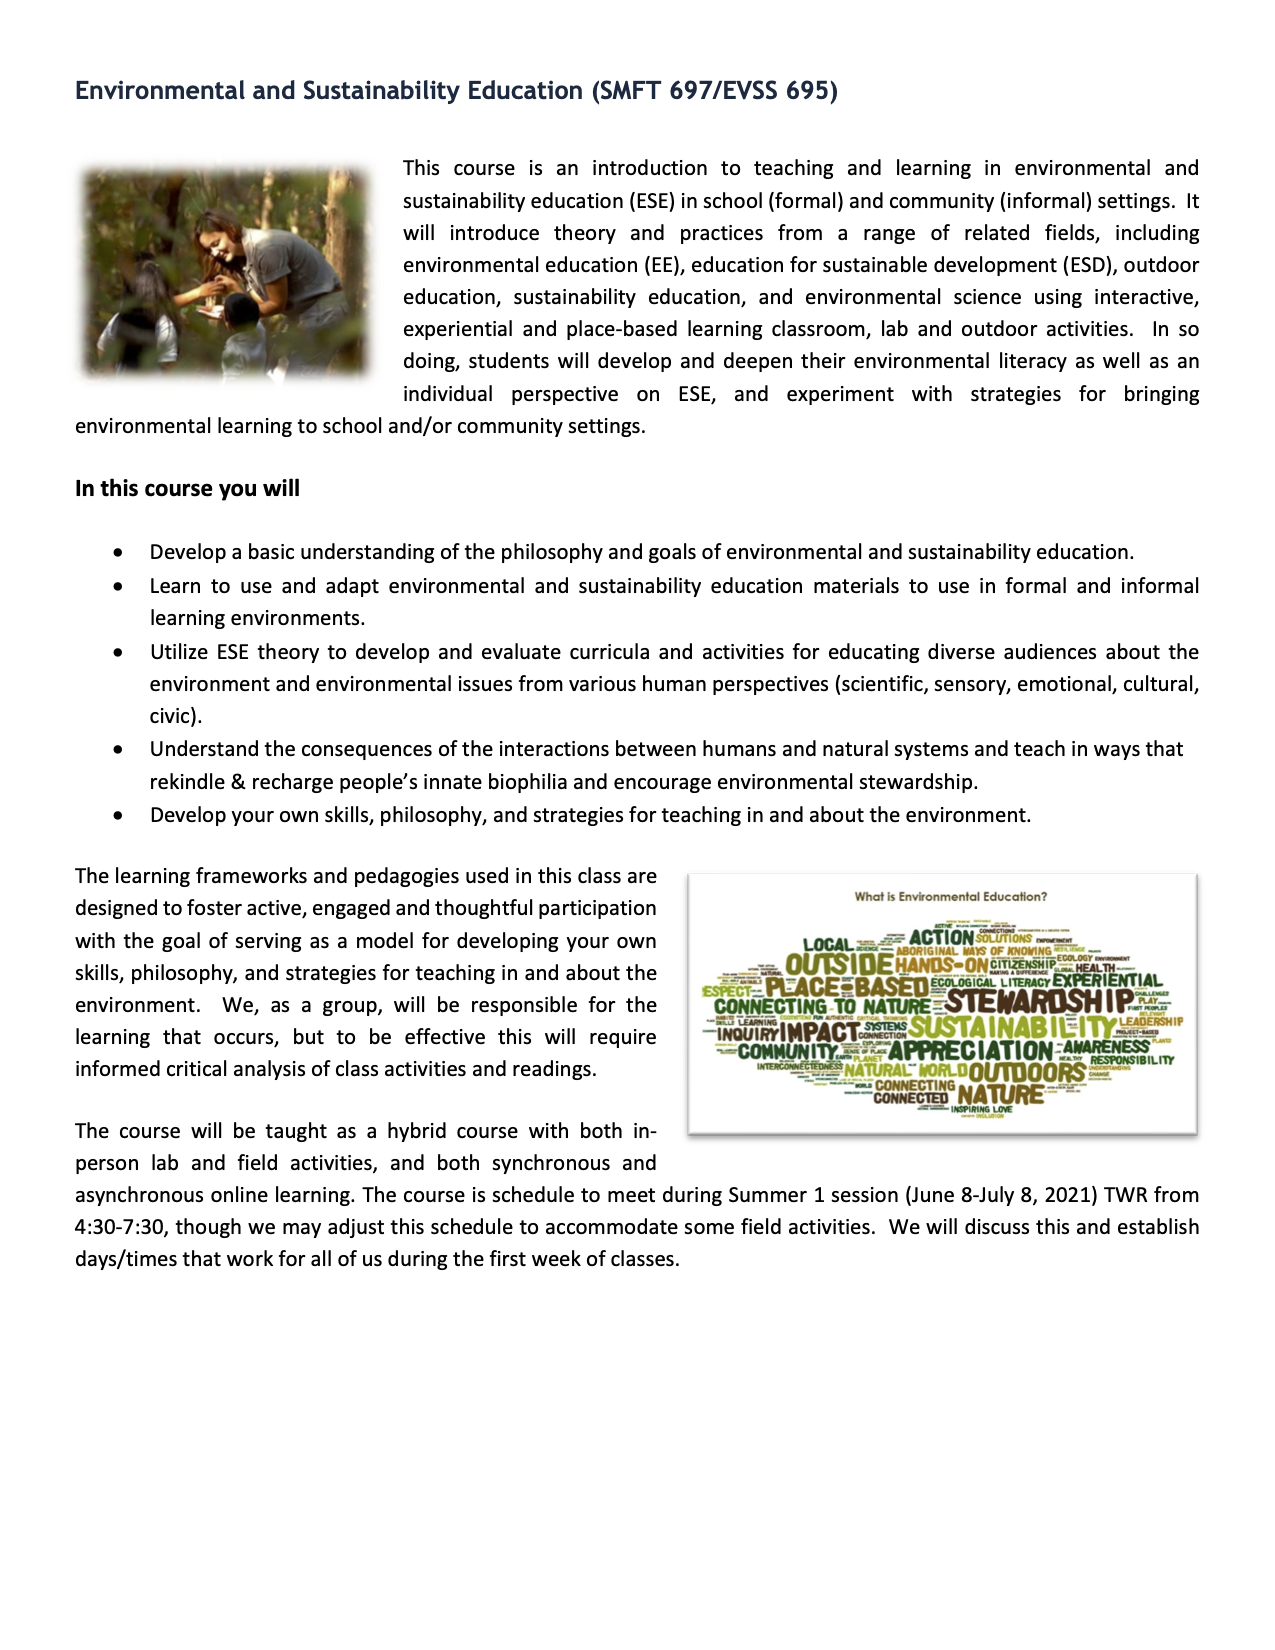 environmental--sustainability-education-flyer.png